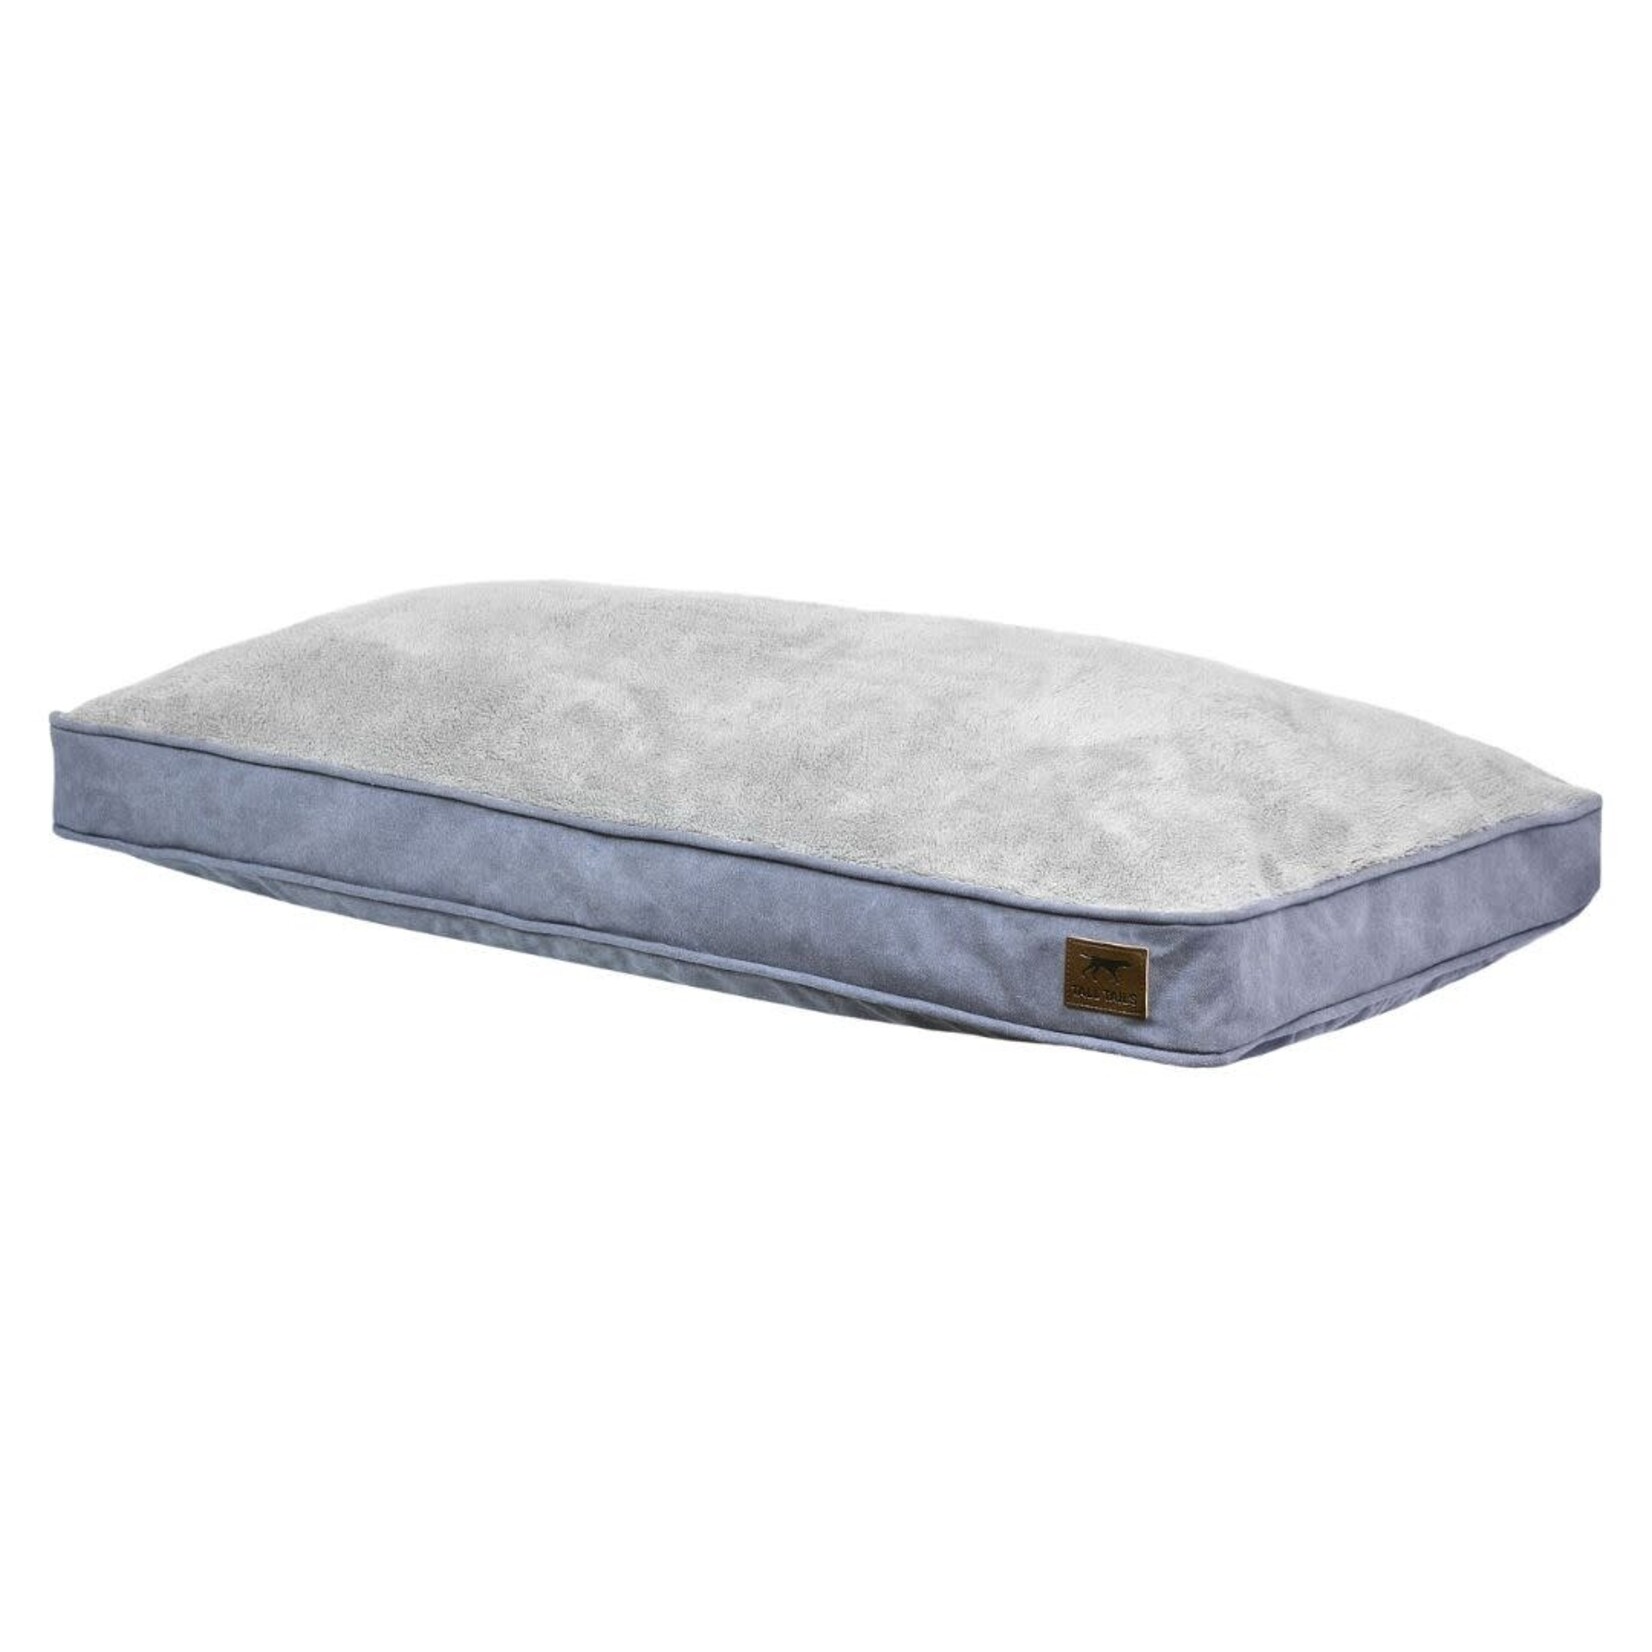 Tall Tails Tall Tails Dream Chaser Charcoal Cushion Bed